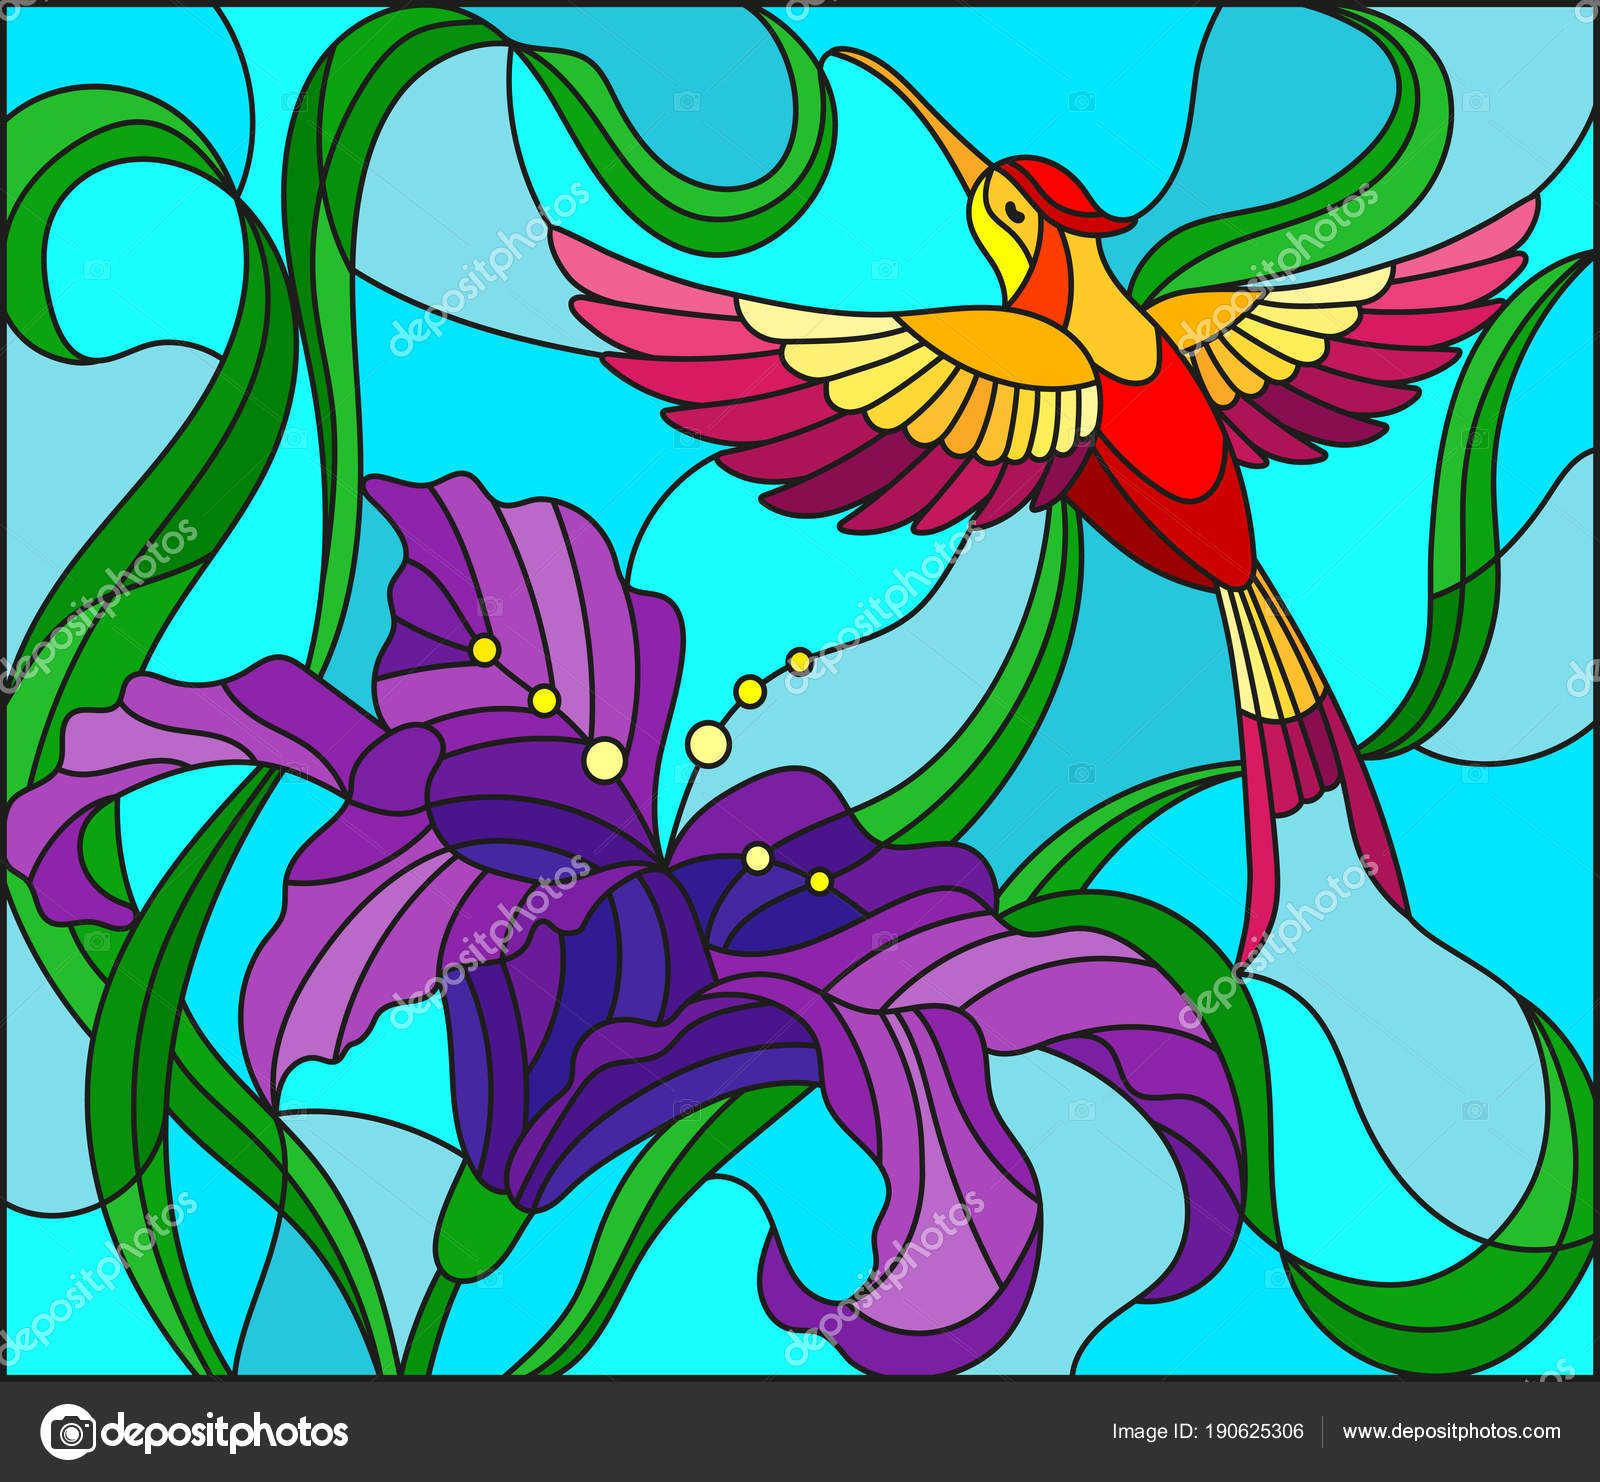 Bright Painting of Colibri among Leaves. Stock Illustration